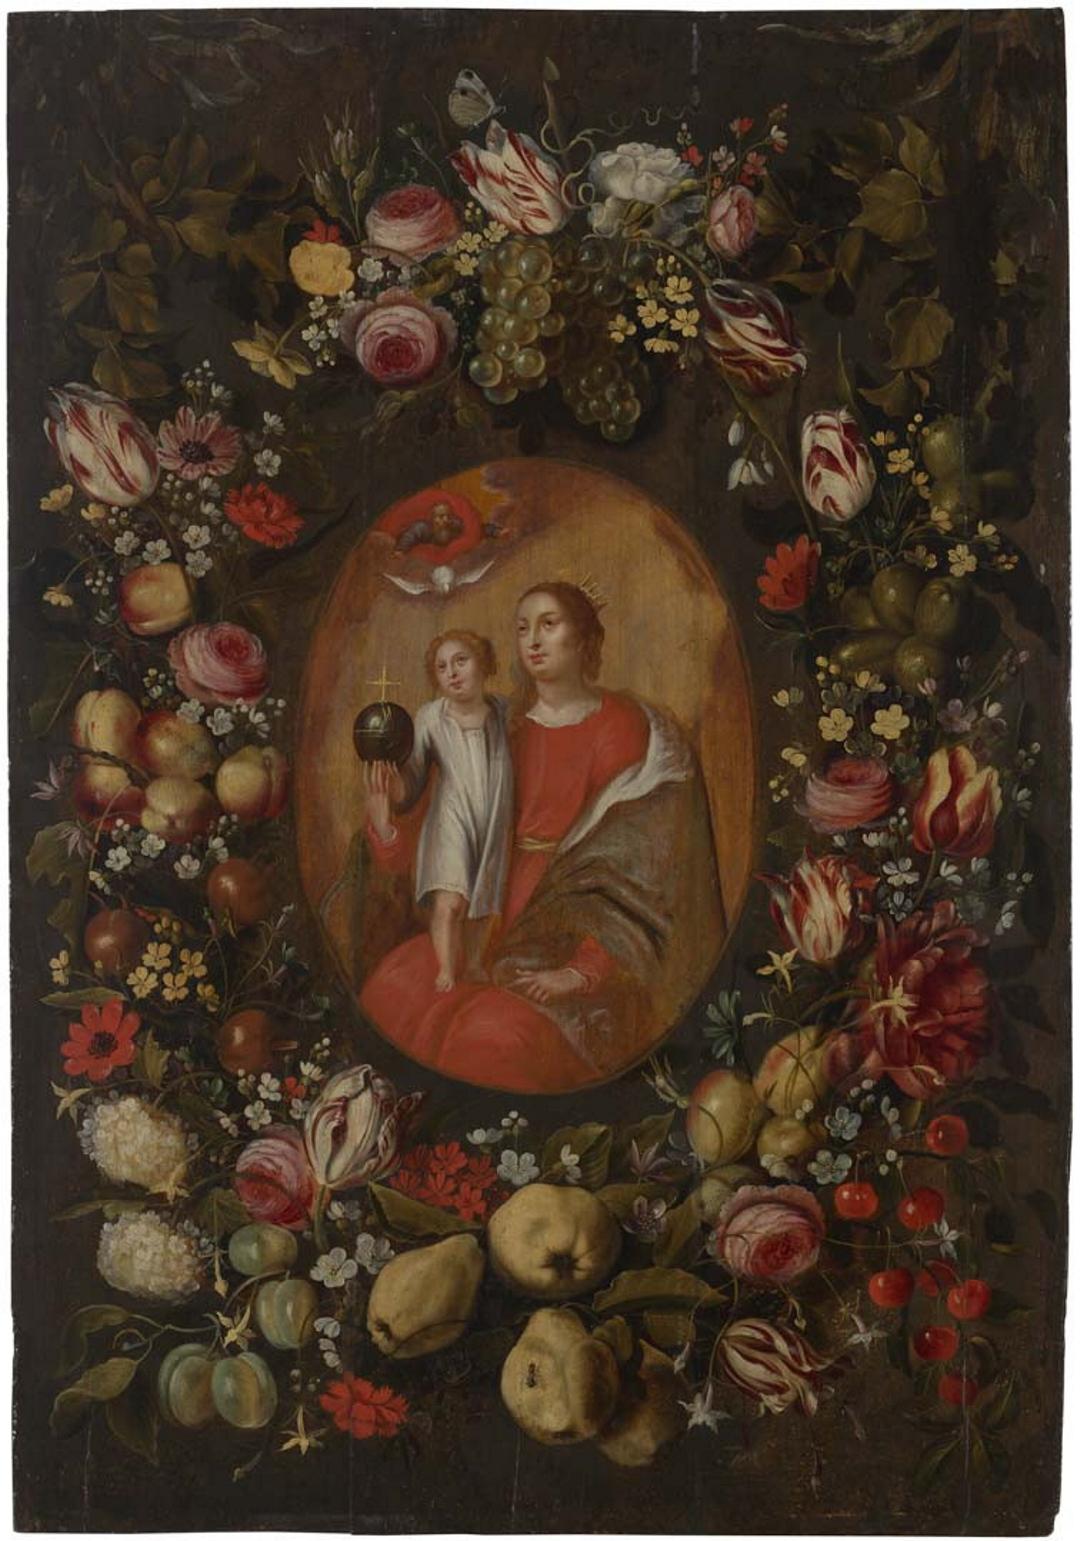 Slider: Near-infrared, Madonna and Child encircled by flowers and fruit DANIELSZ, attrib. to Andries